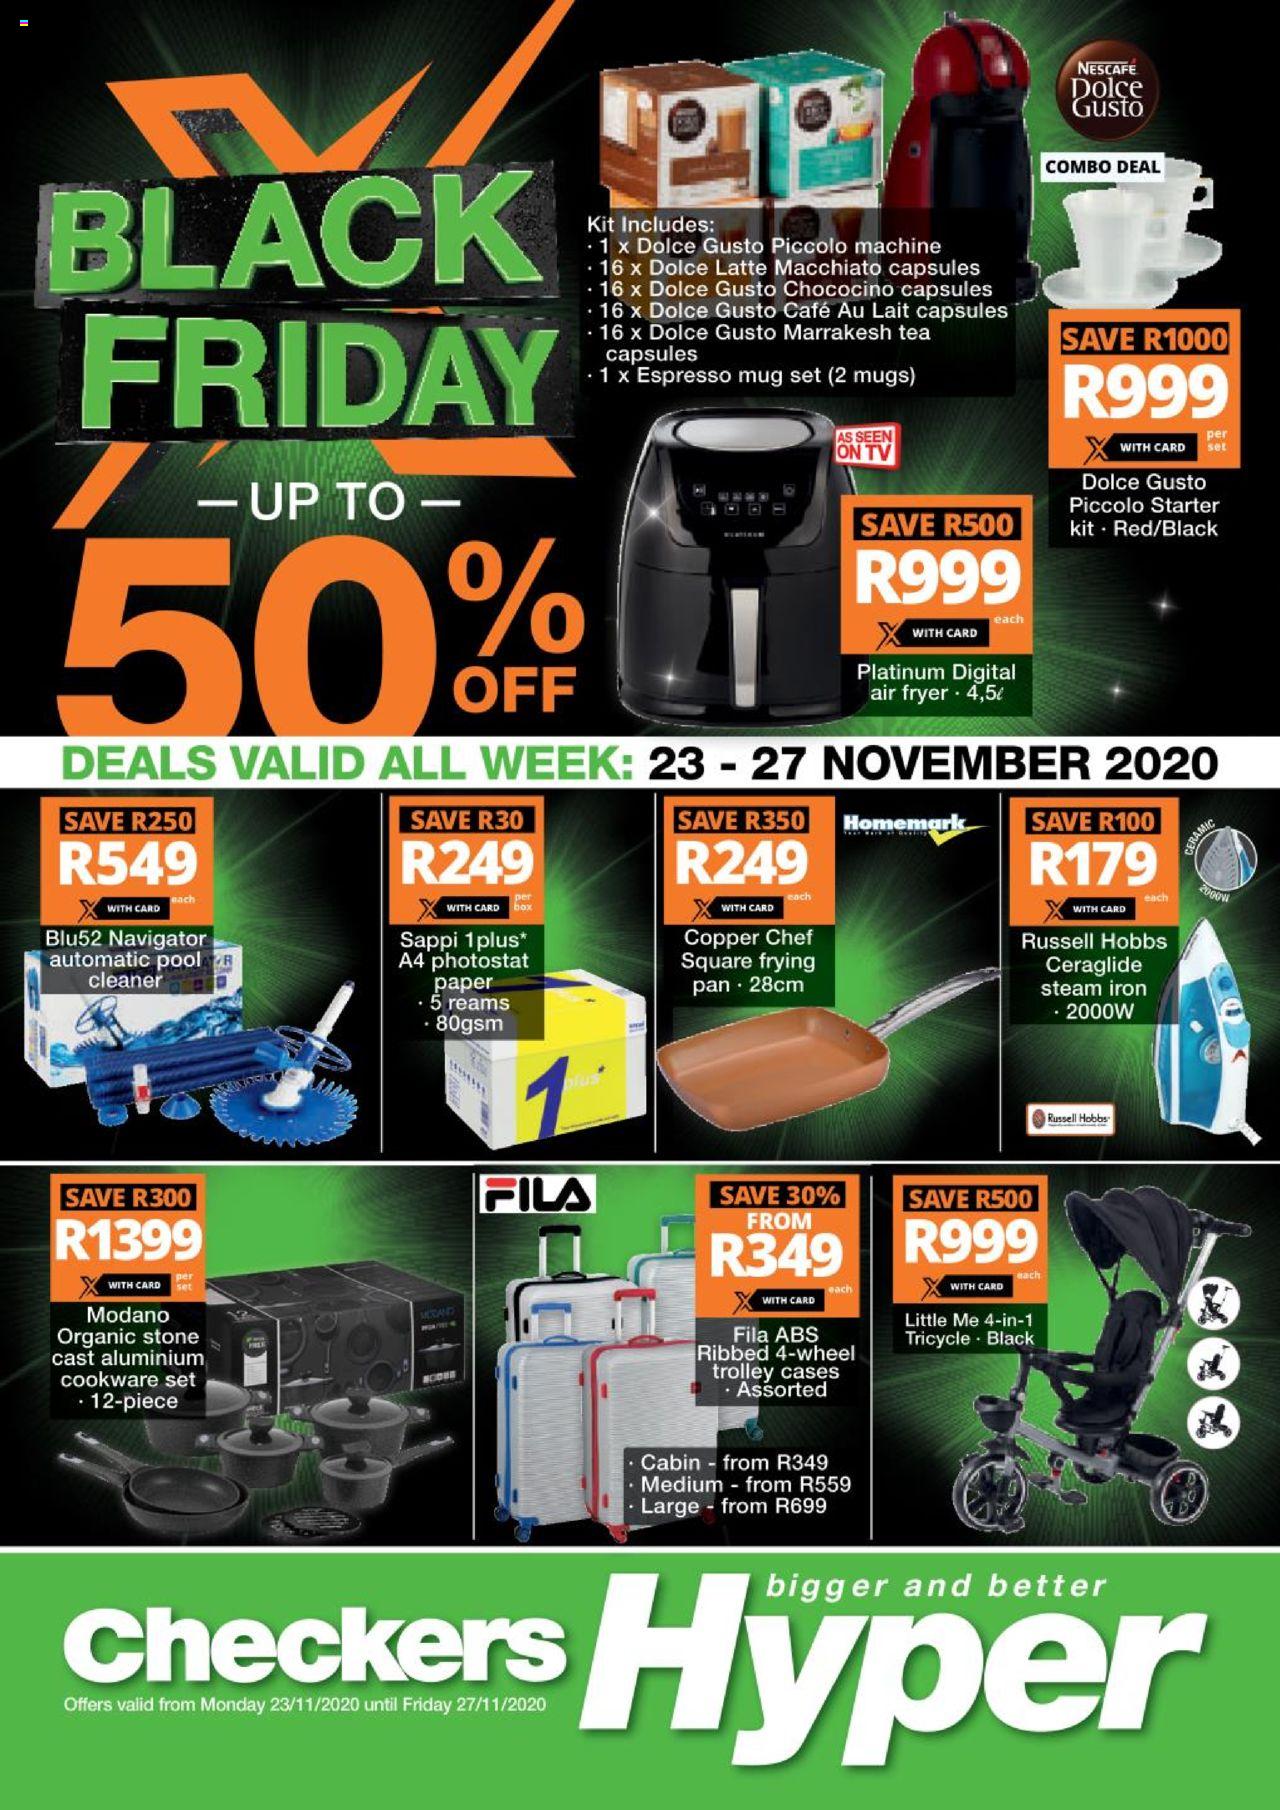 Checkers Black Friday Catalogue Specials 2021 - Will Thurday Deals Be Available On Black Friday